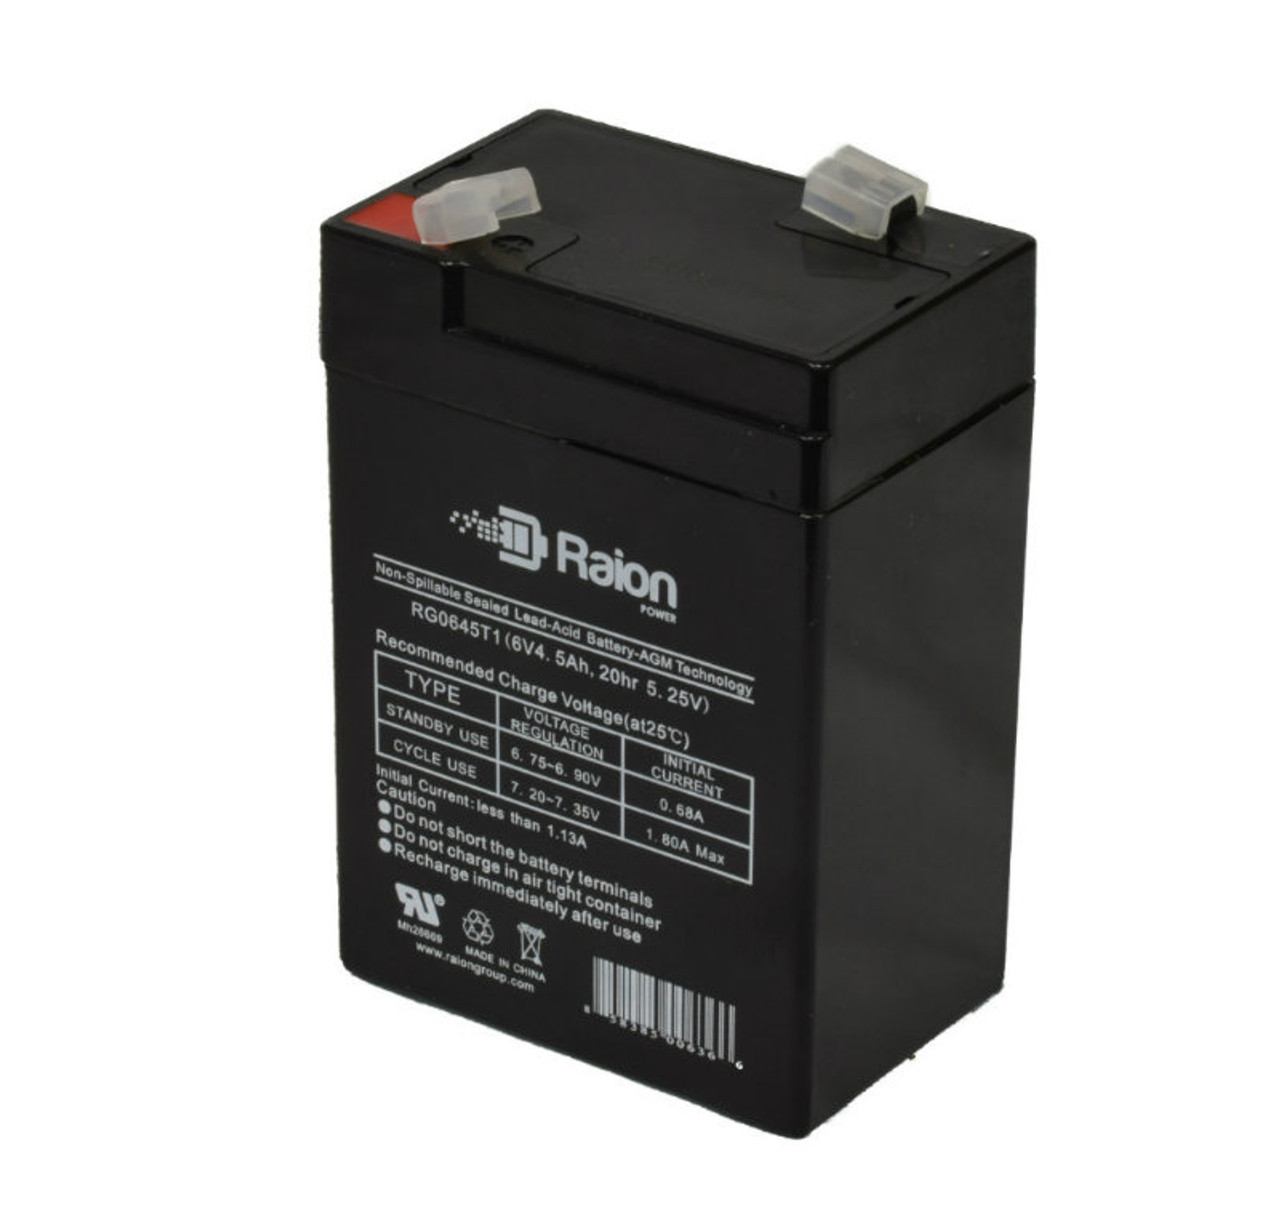 Raion Power RG0645T1 6V 4.5Ah Replacement Battery Cartridge for Teledyne SQ6S5